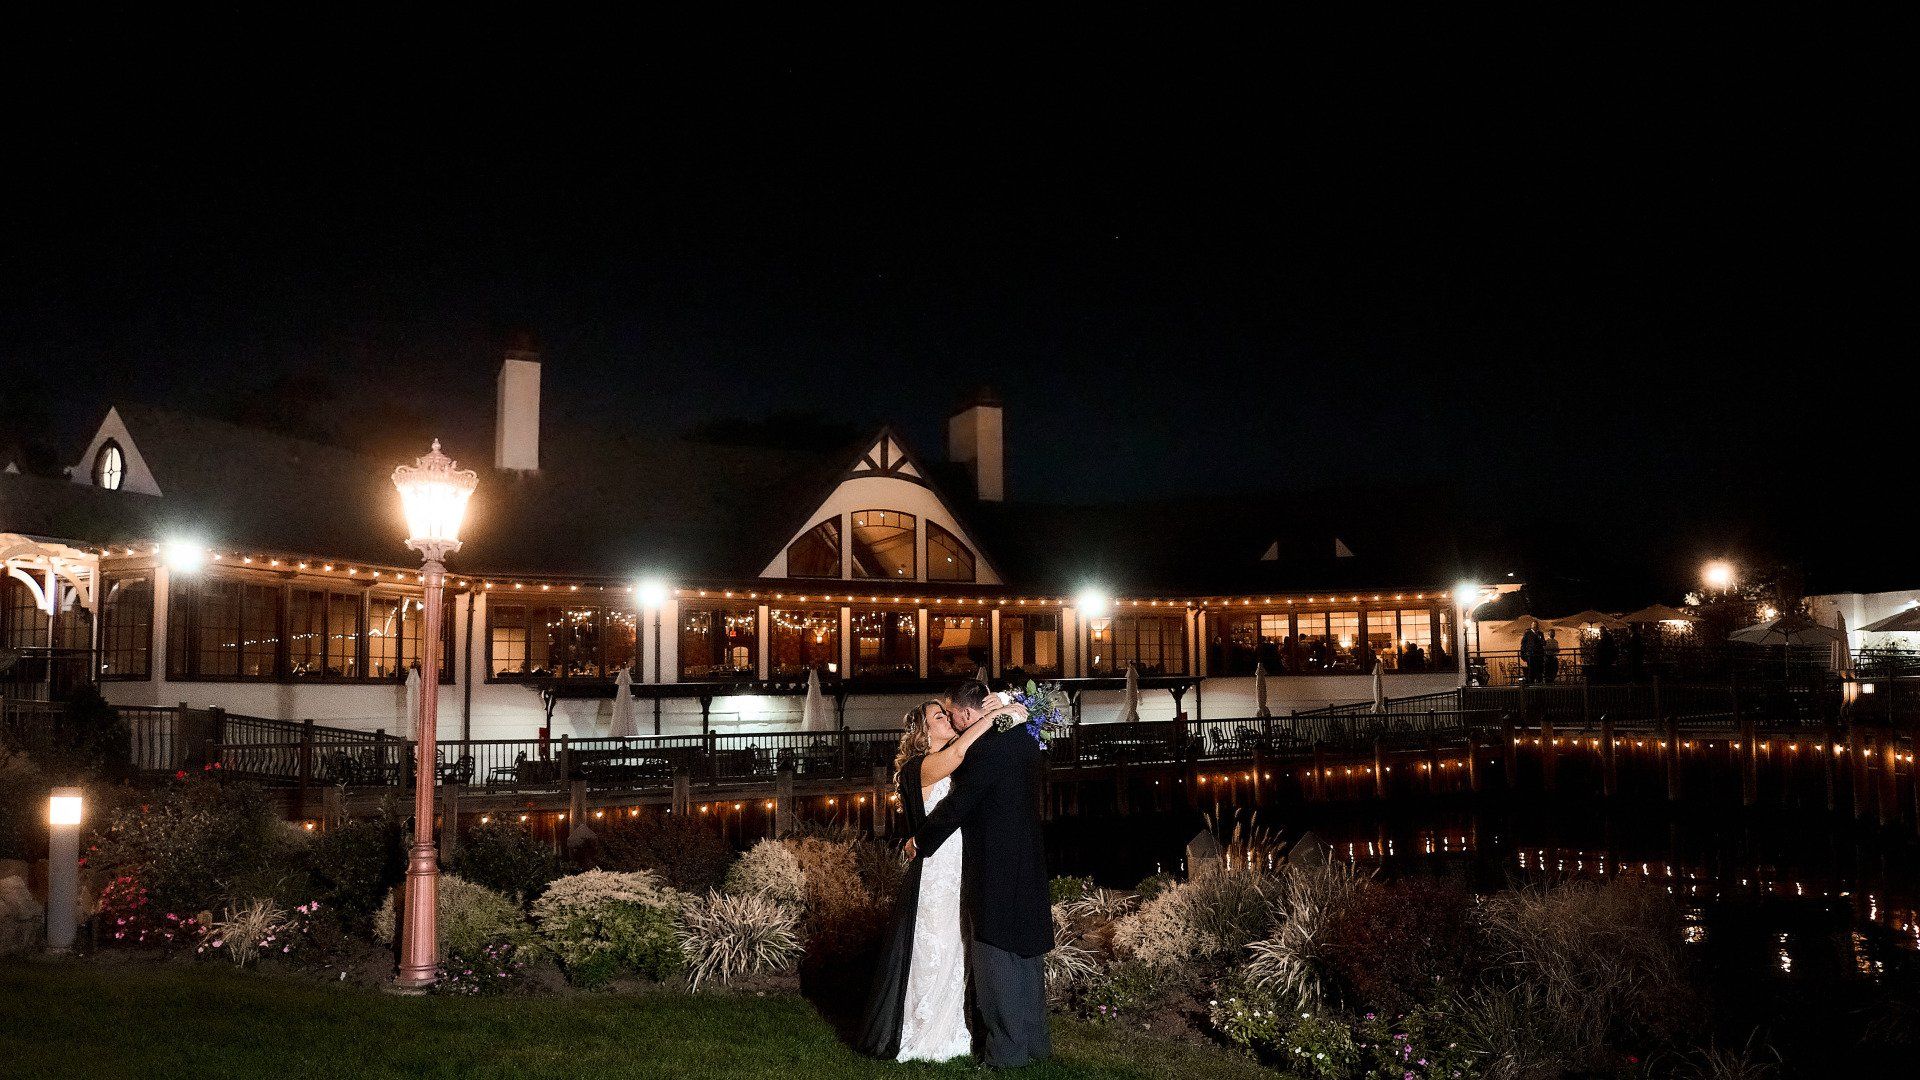 A bride and groom are kissing in front of a large building at night.